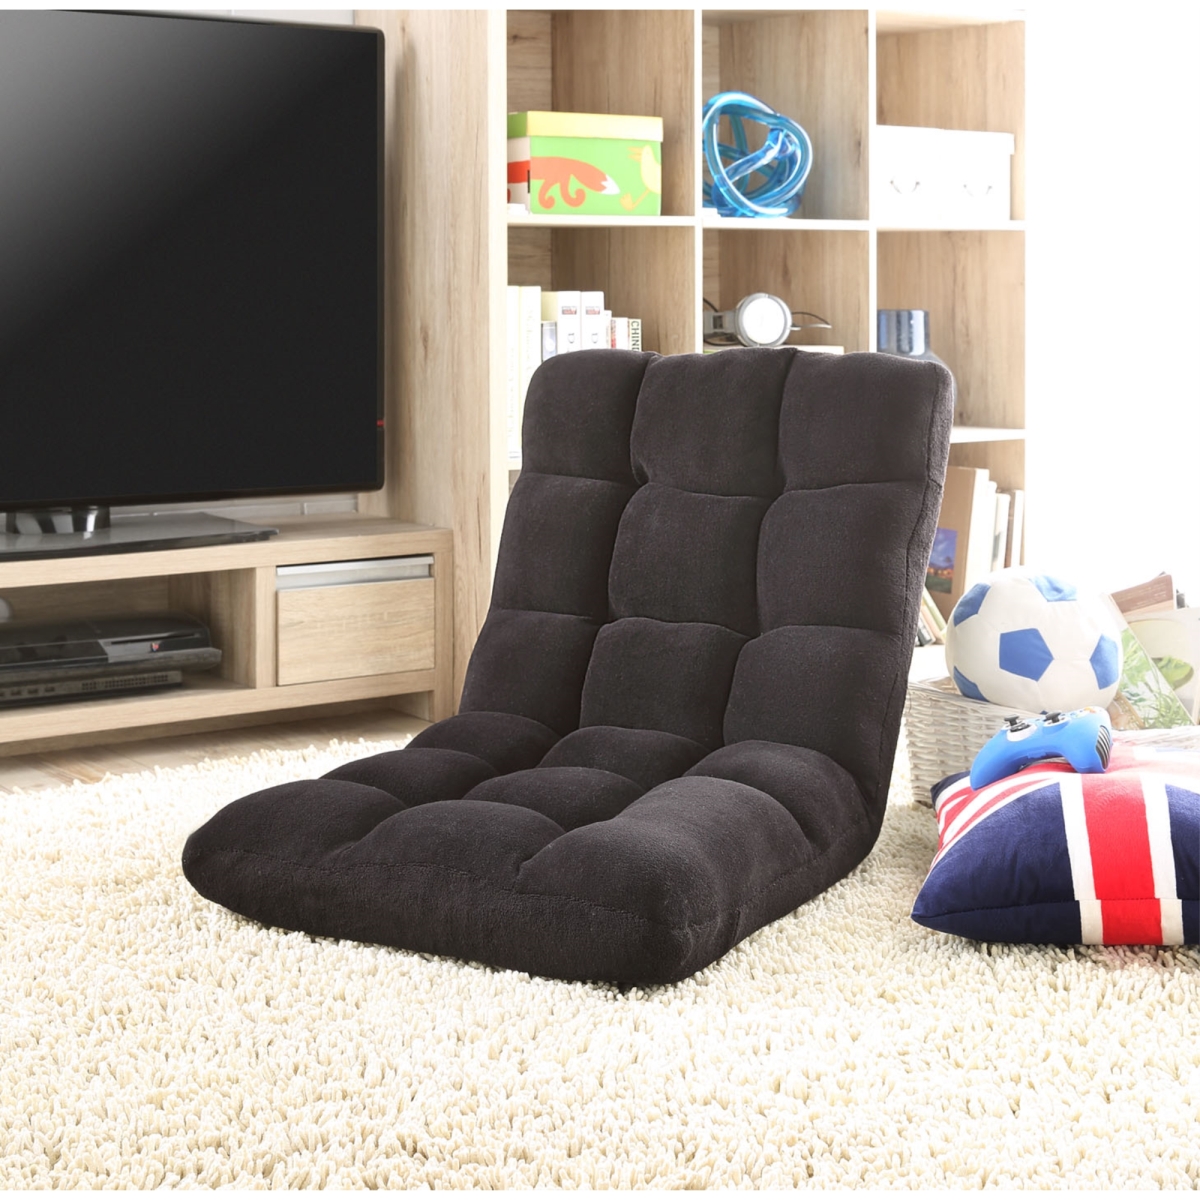 Picture of  Microplush Modern Armless Quilted Recliner Chair with foam filling and steel tube frame - Black